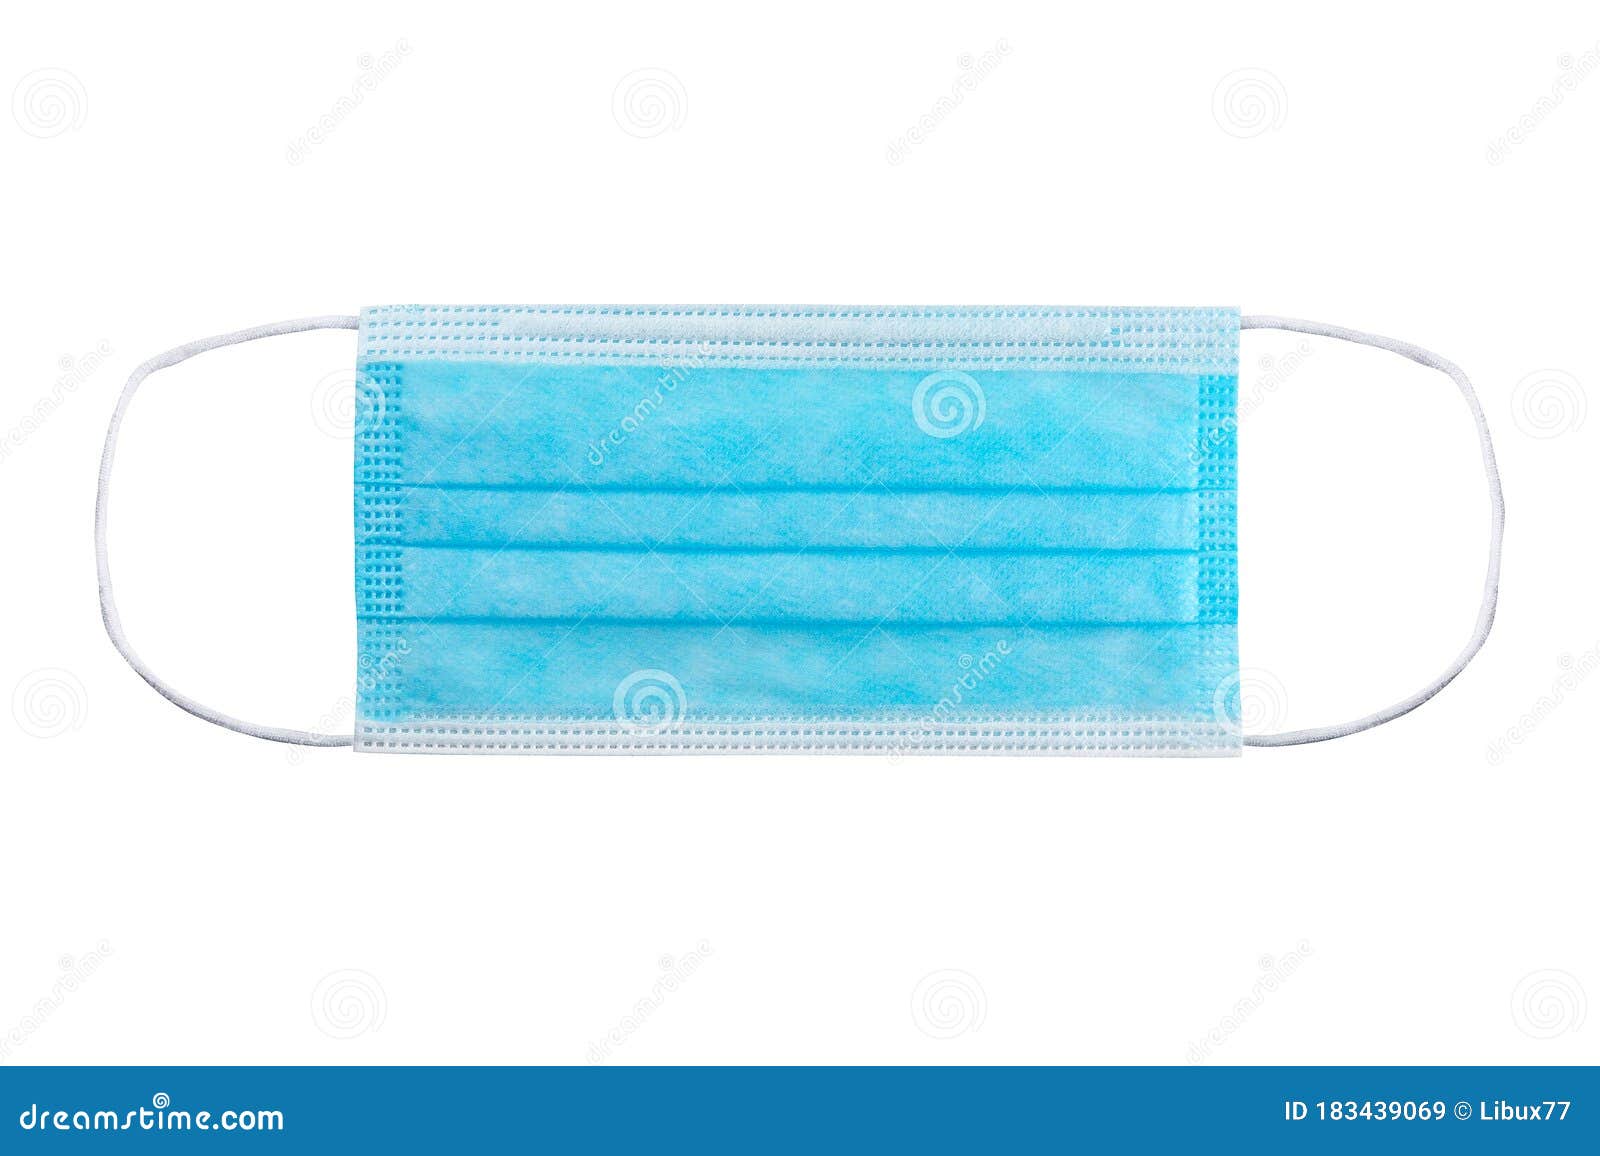 top view of unfold surgical mask  with rubber ear straps to cover the mouth and nose to protect face from virus